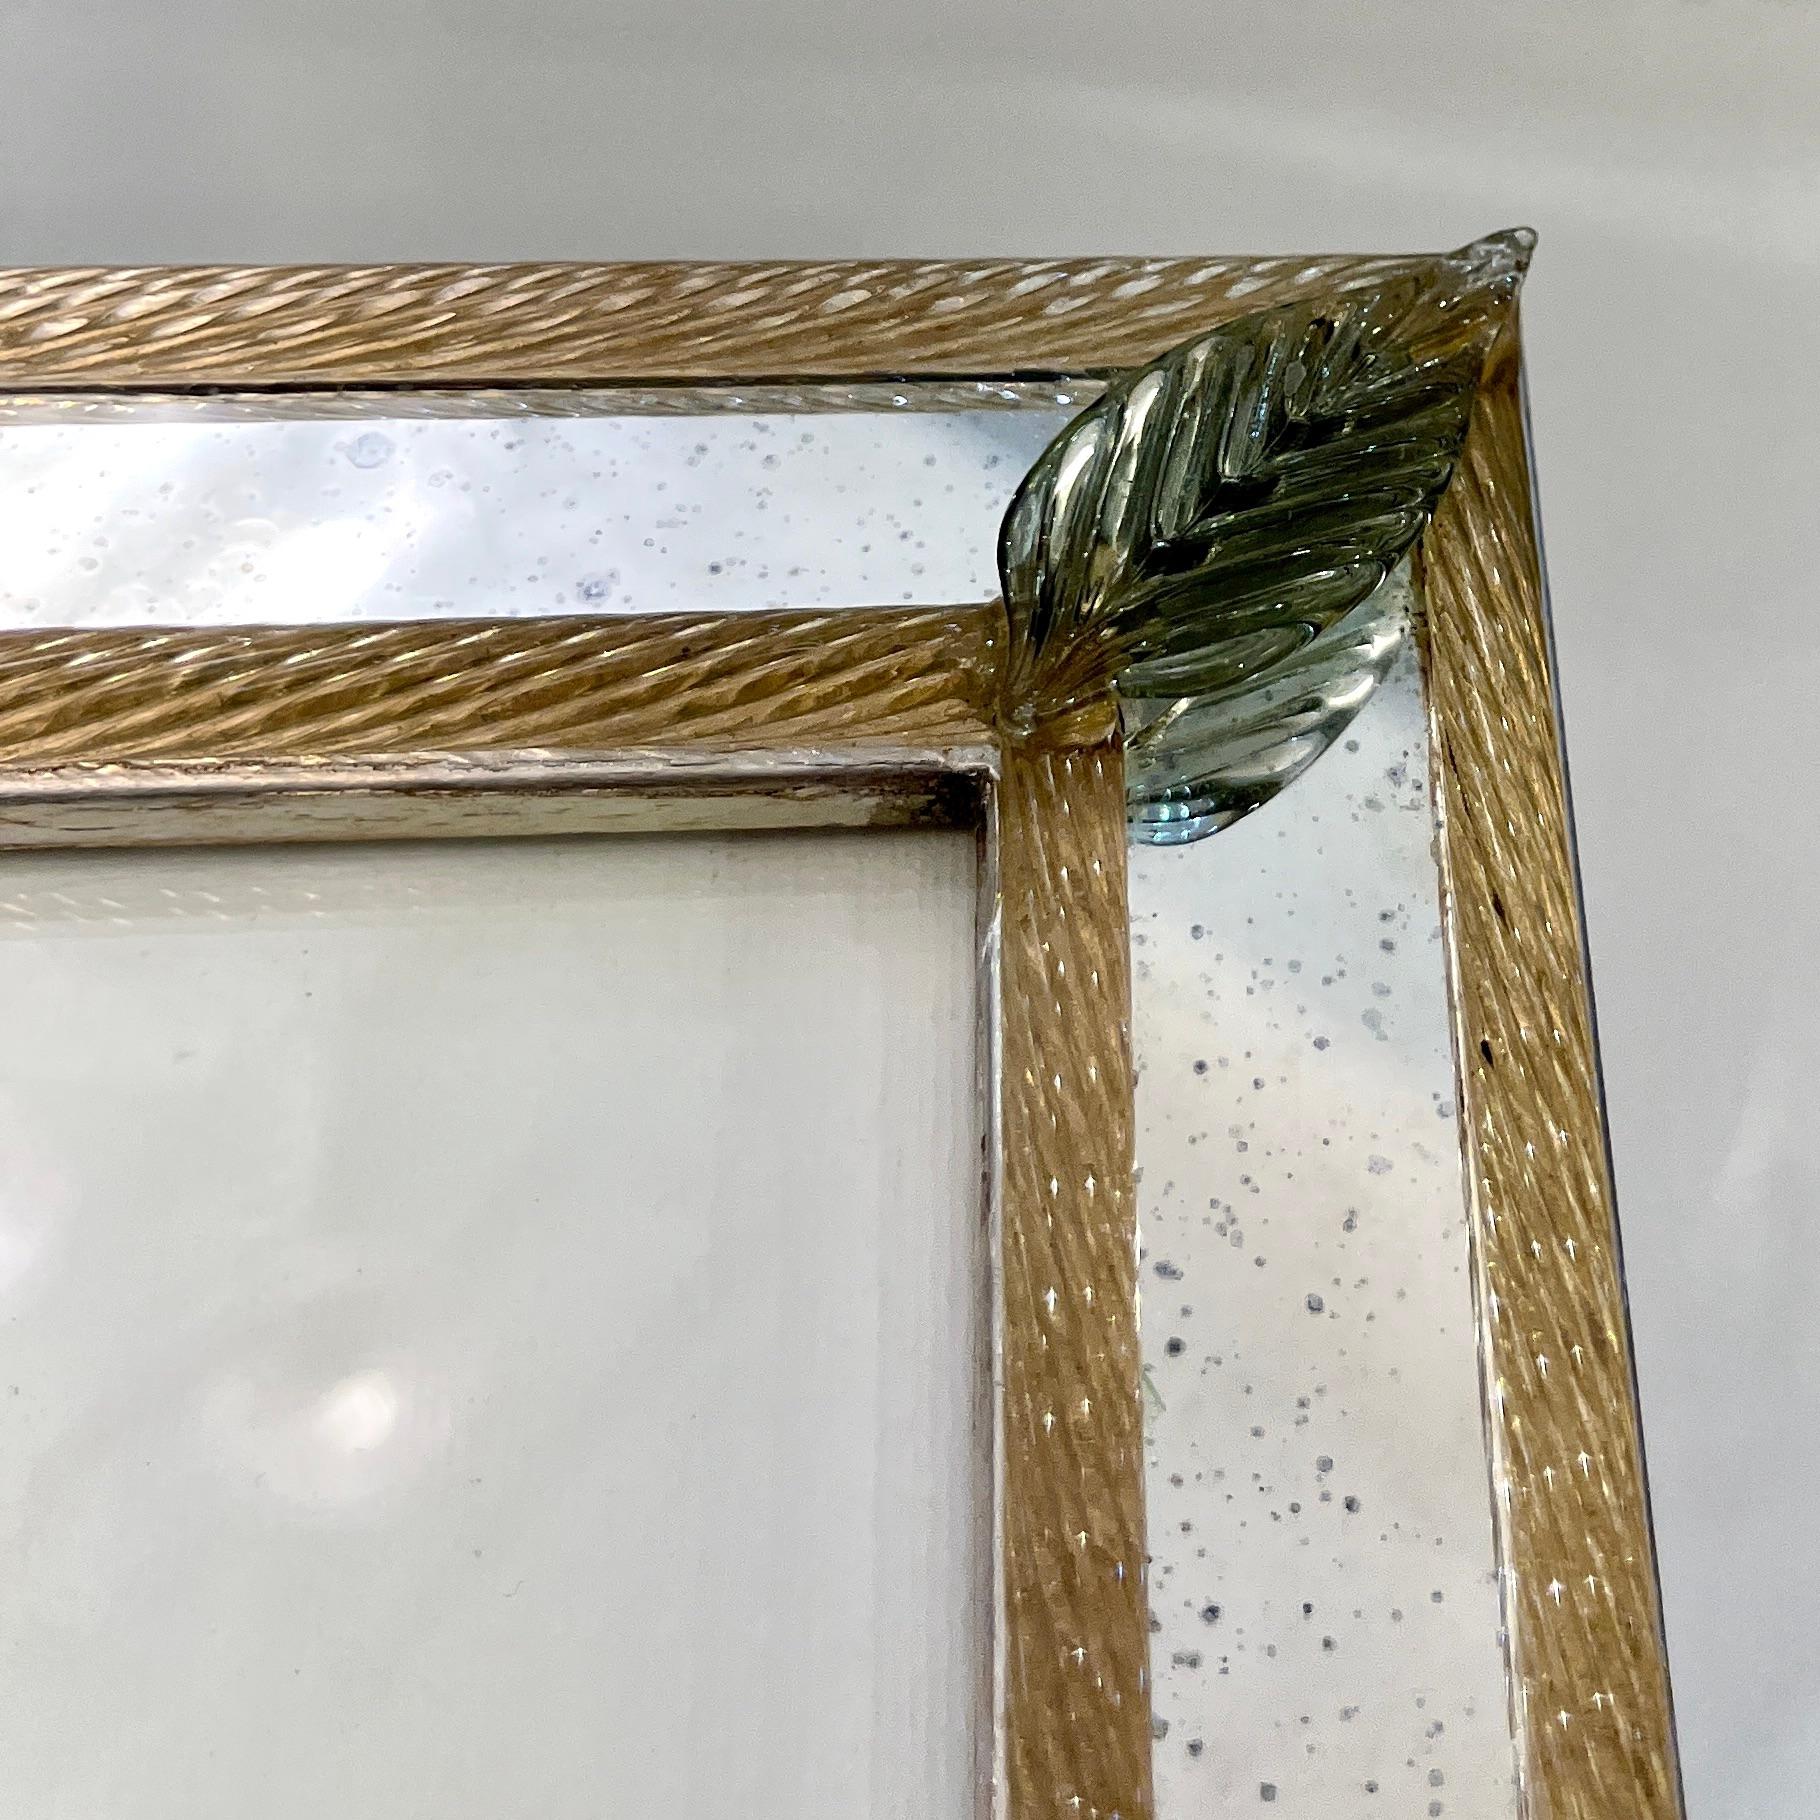 Hand-Crafted 1960s Italian Vintage Mirror Photo Frame Green Leaves & Gold Murano Glass Decor